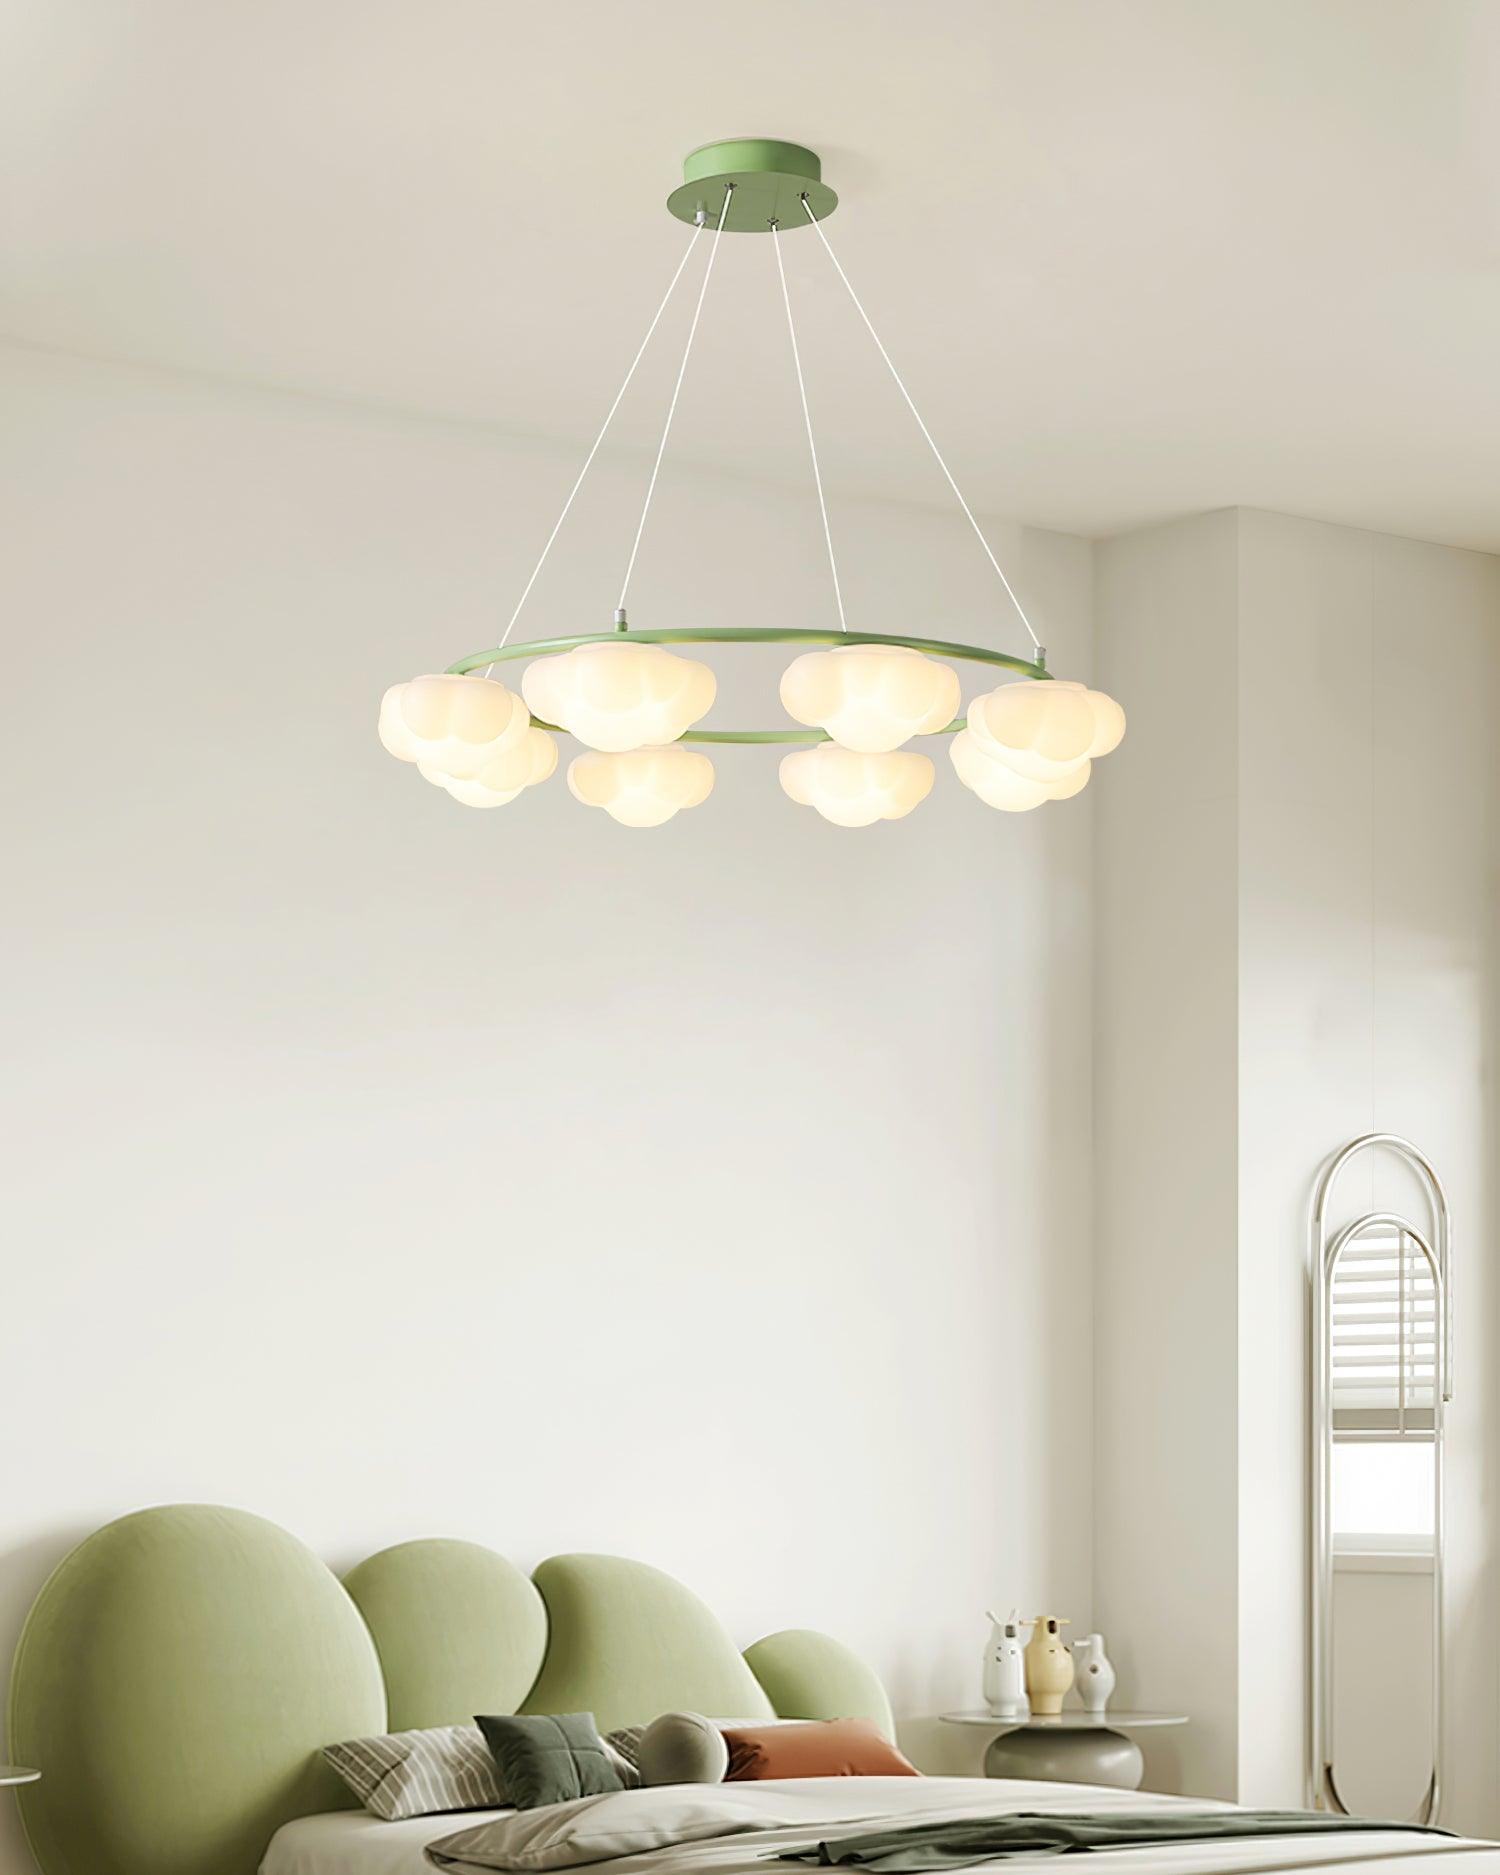 The Clouds Chandelier - Docos